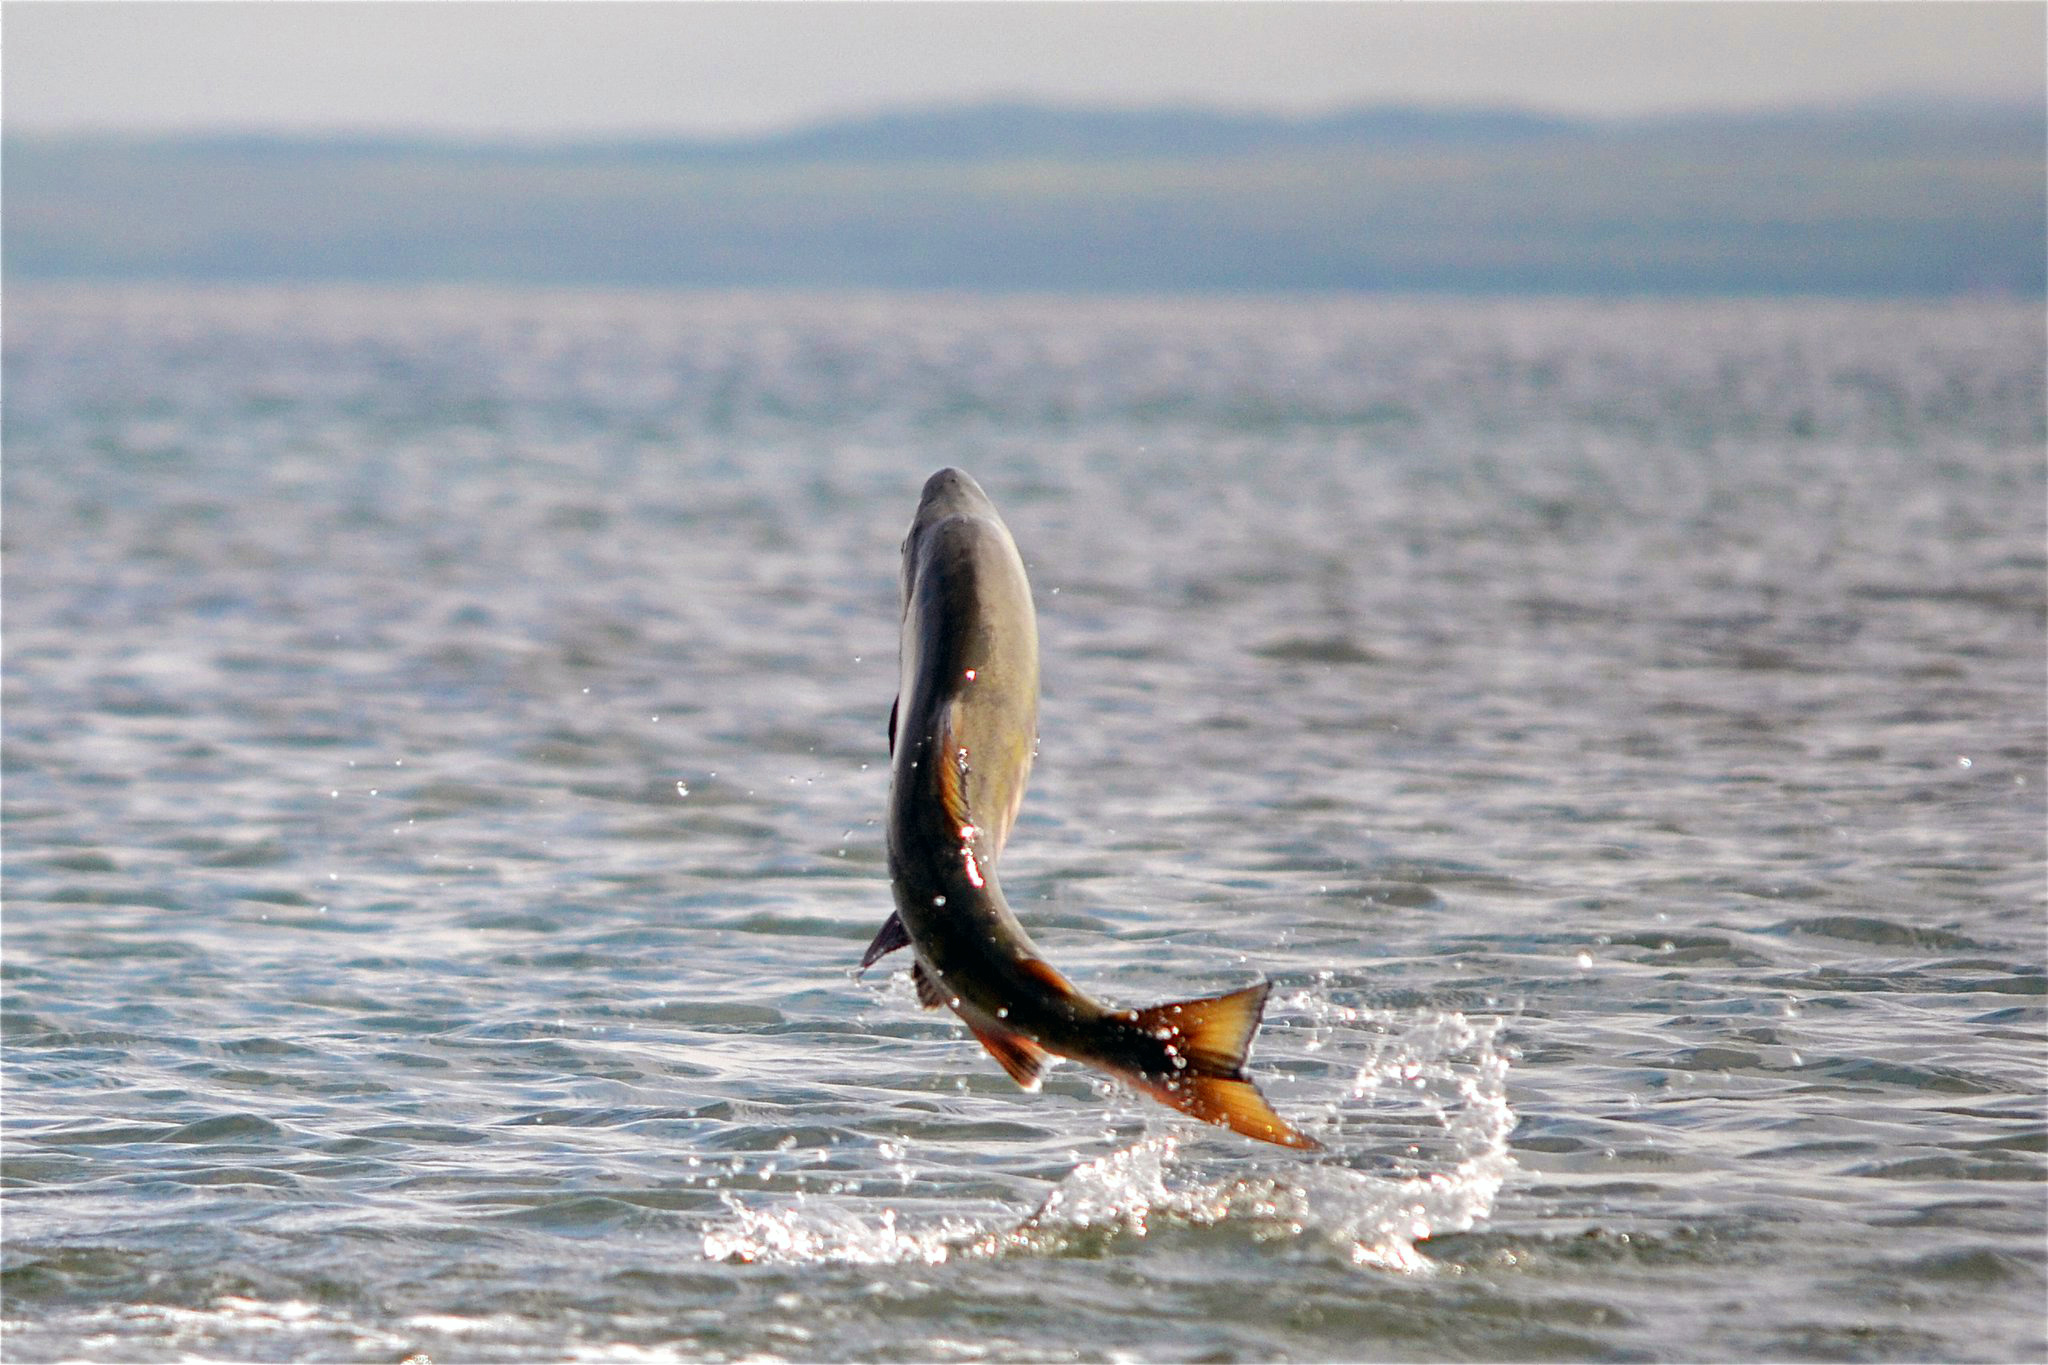 Salmon jumping in the water